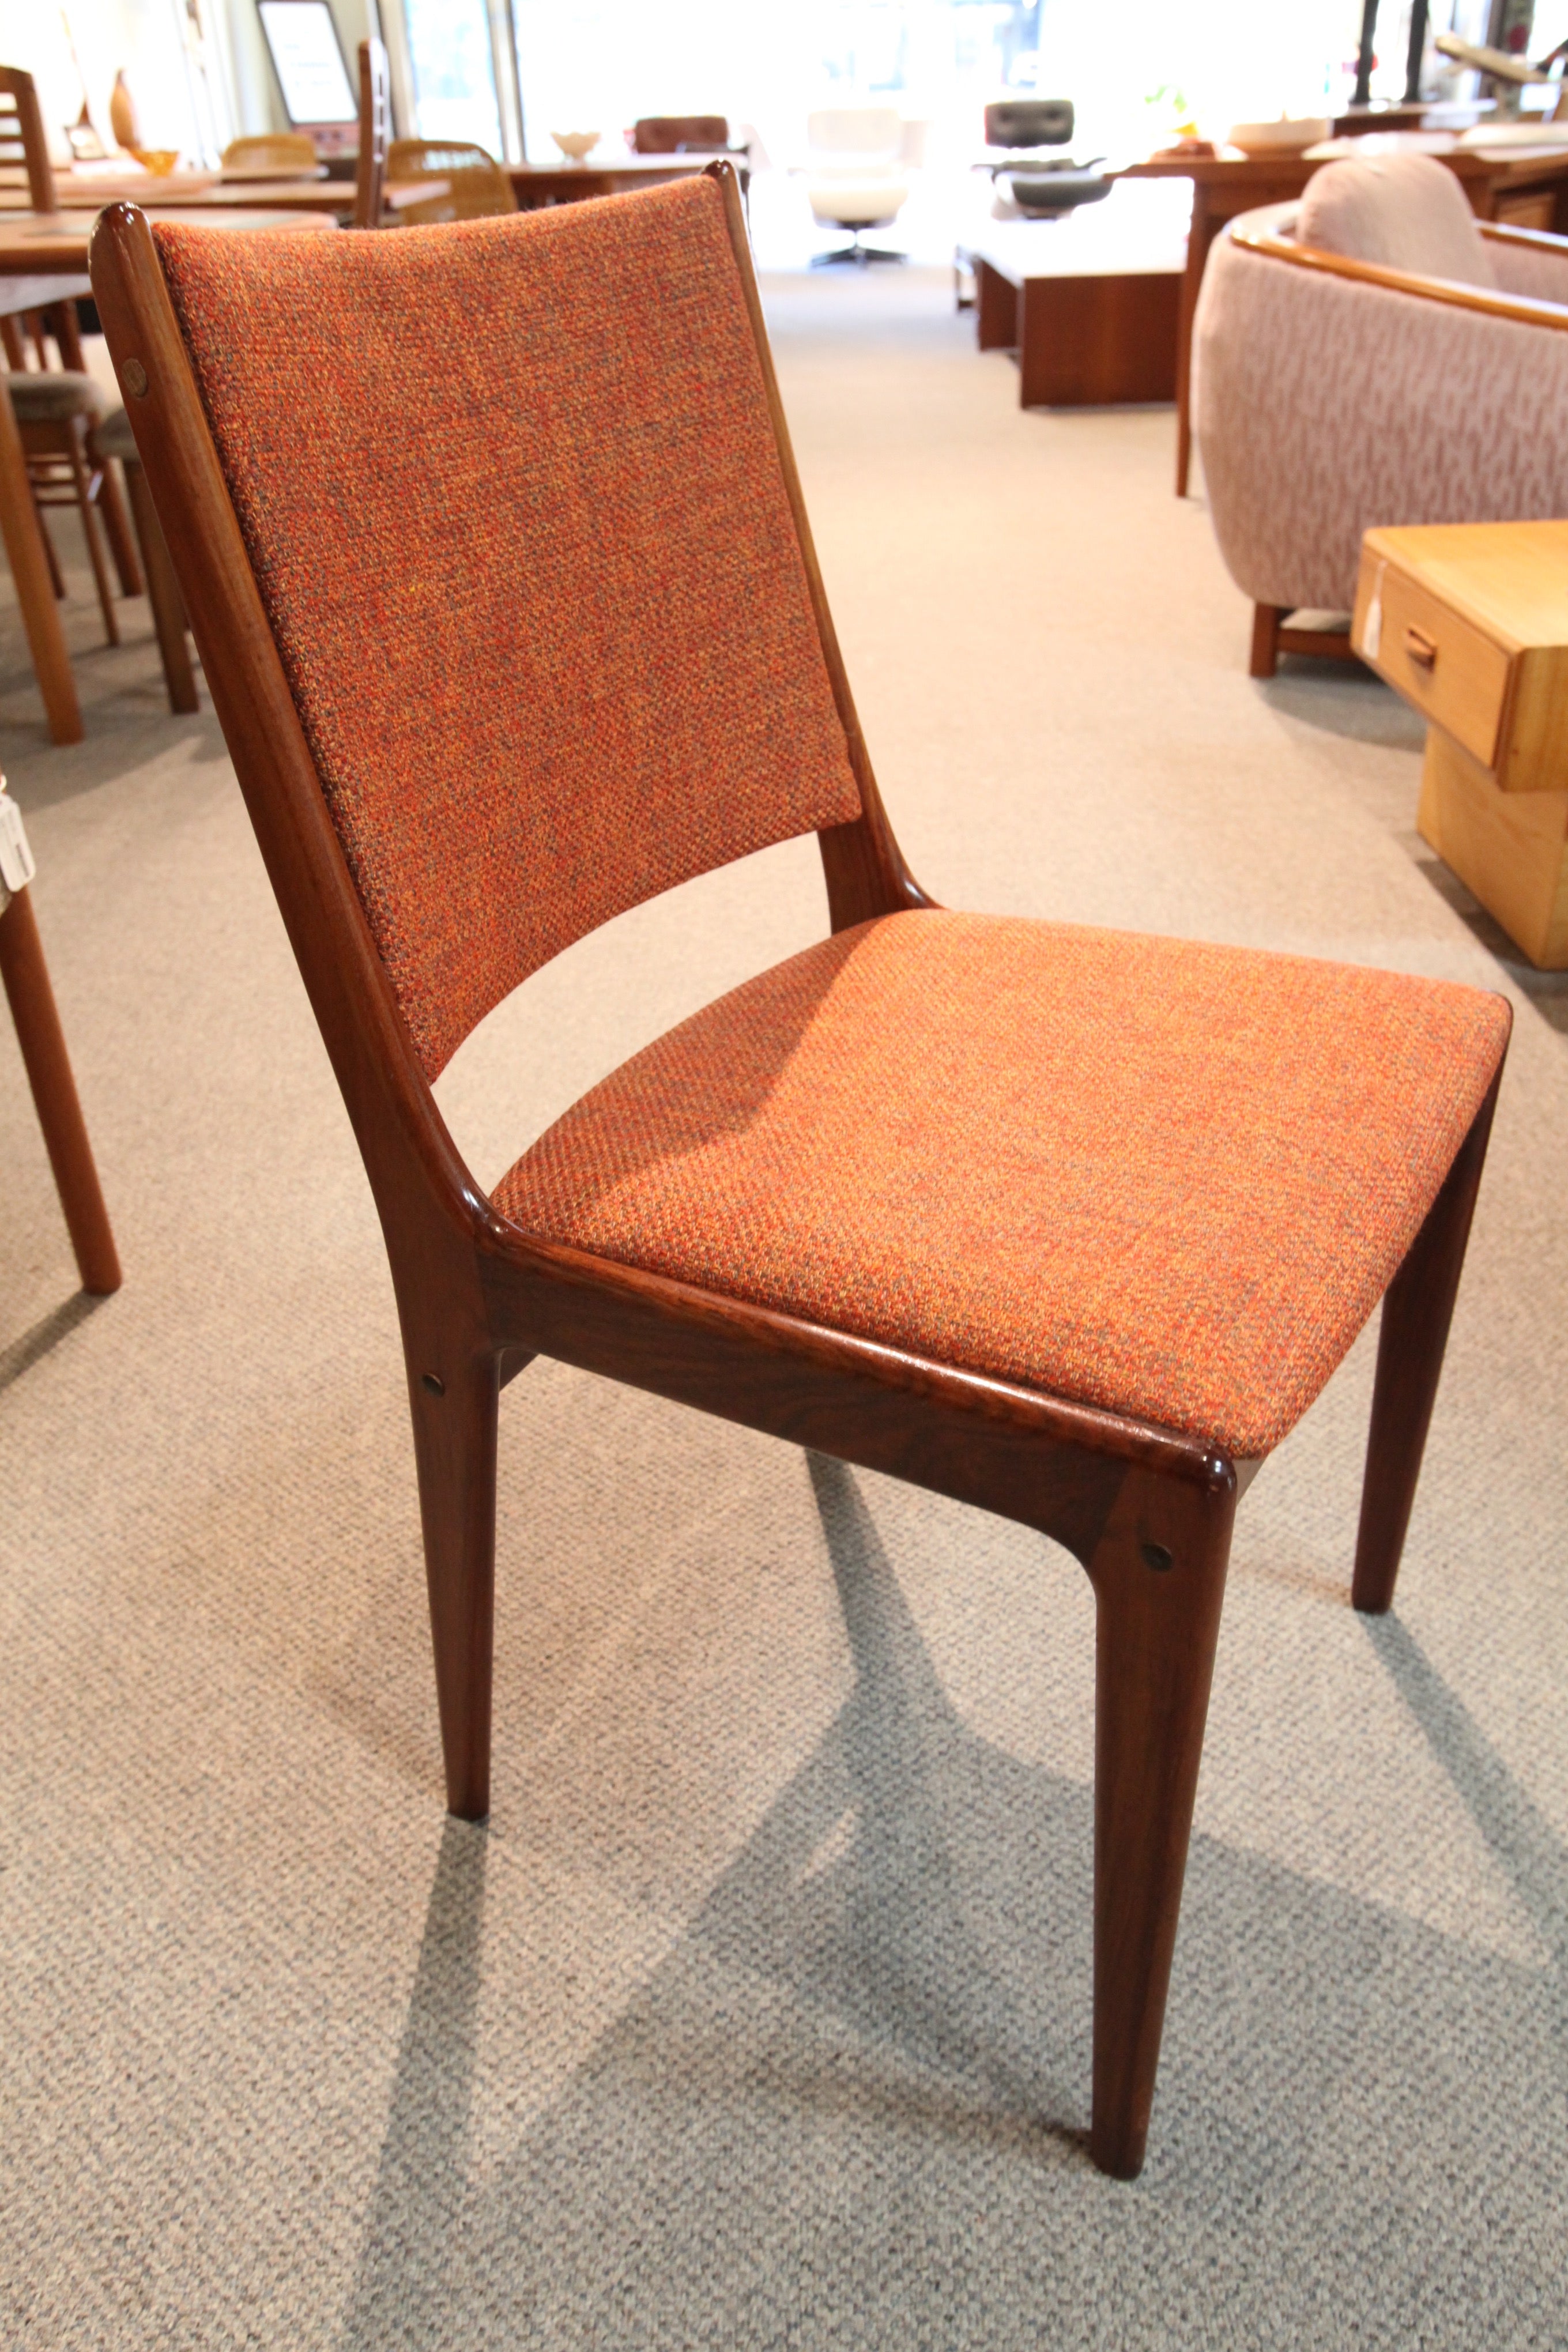 Set of 6 Teak Chairs (new upholstery)